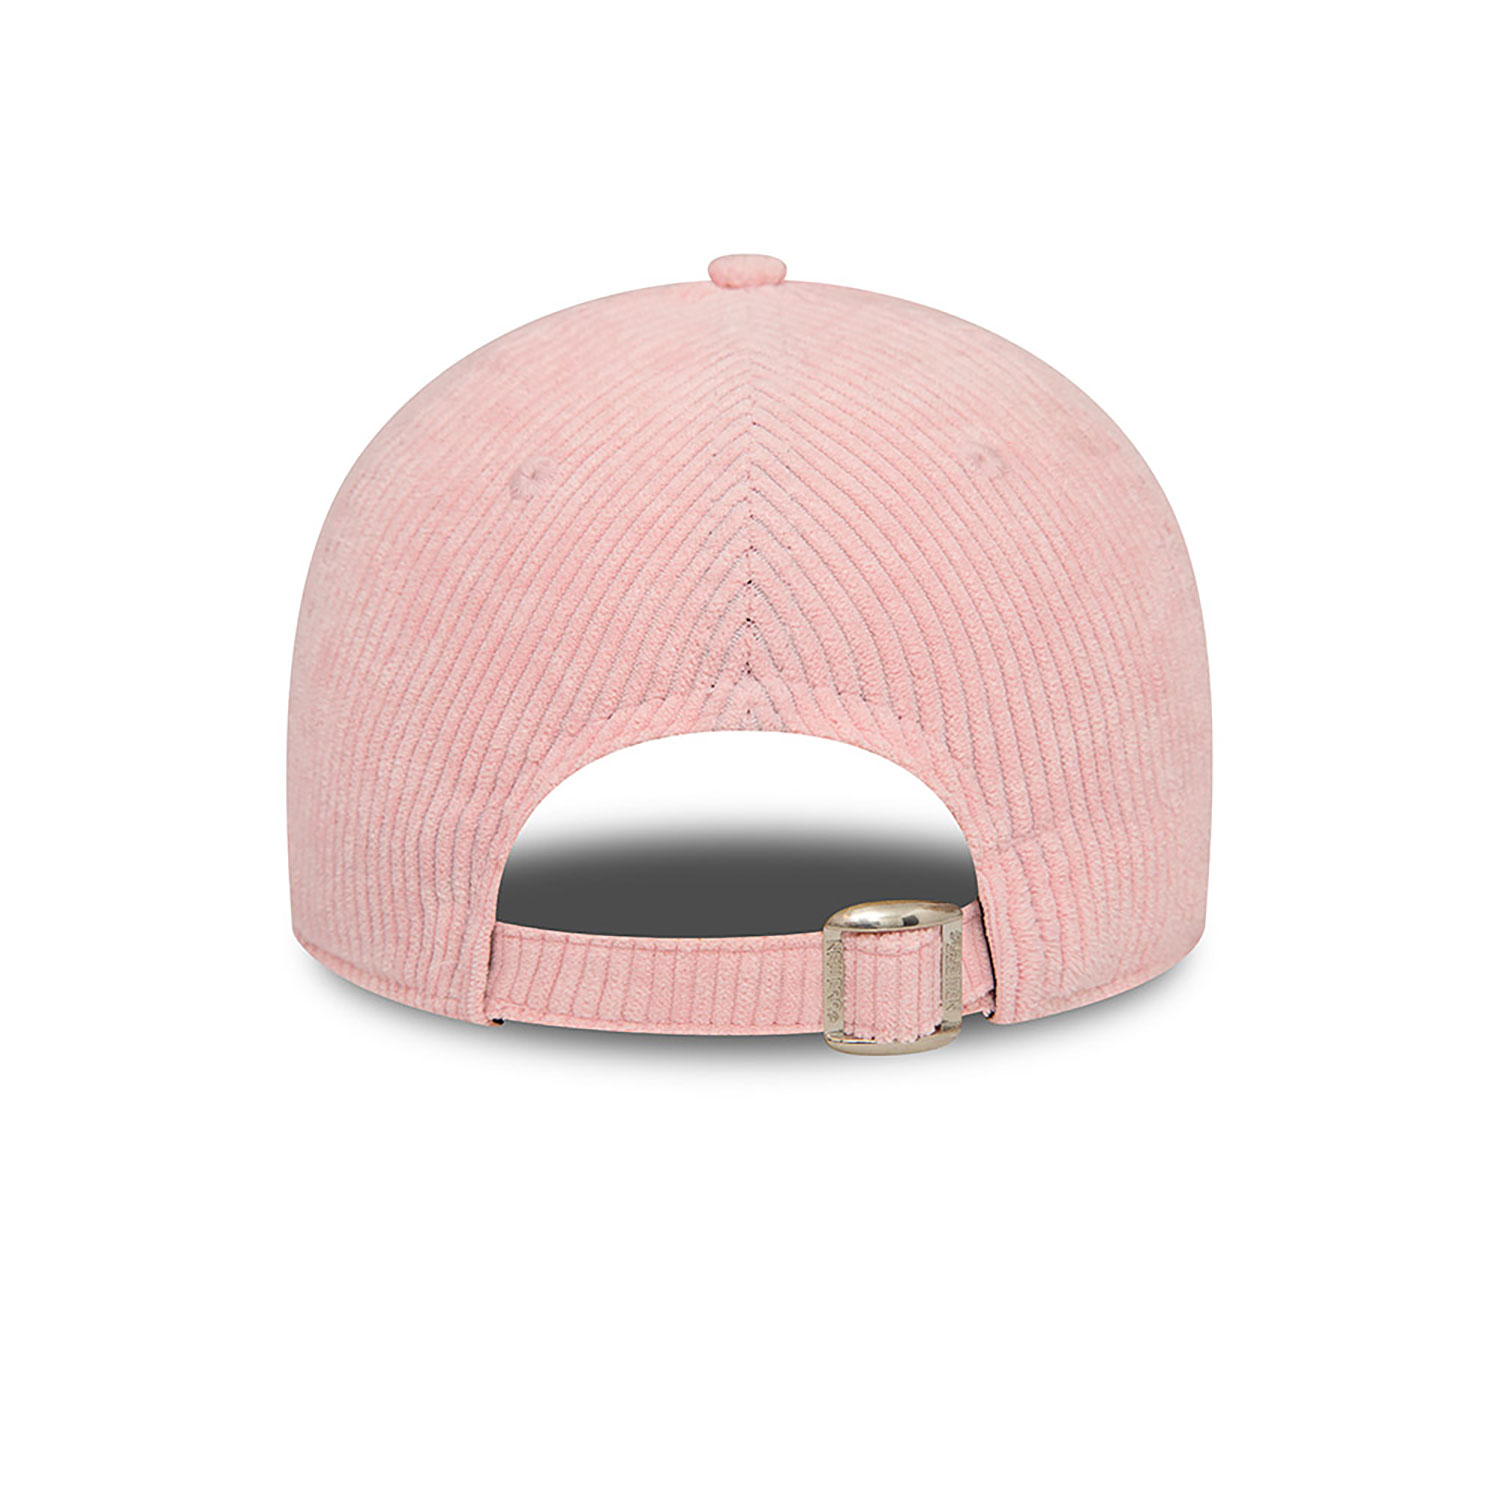 New York Yankees Womens Summer Cord Pink 9FORTY Adjustable Cap